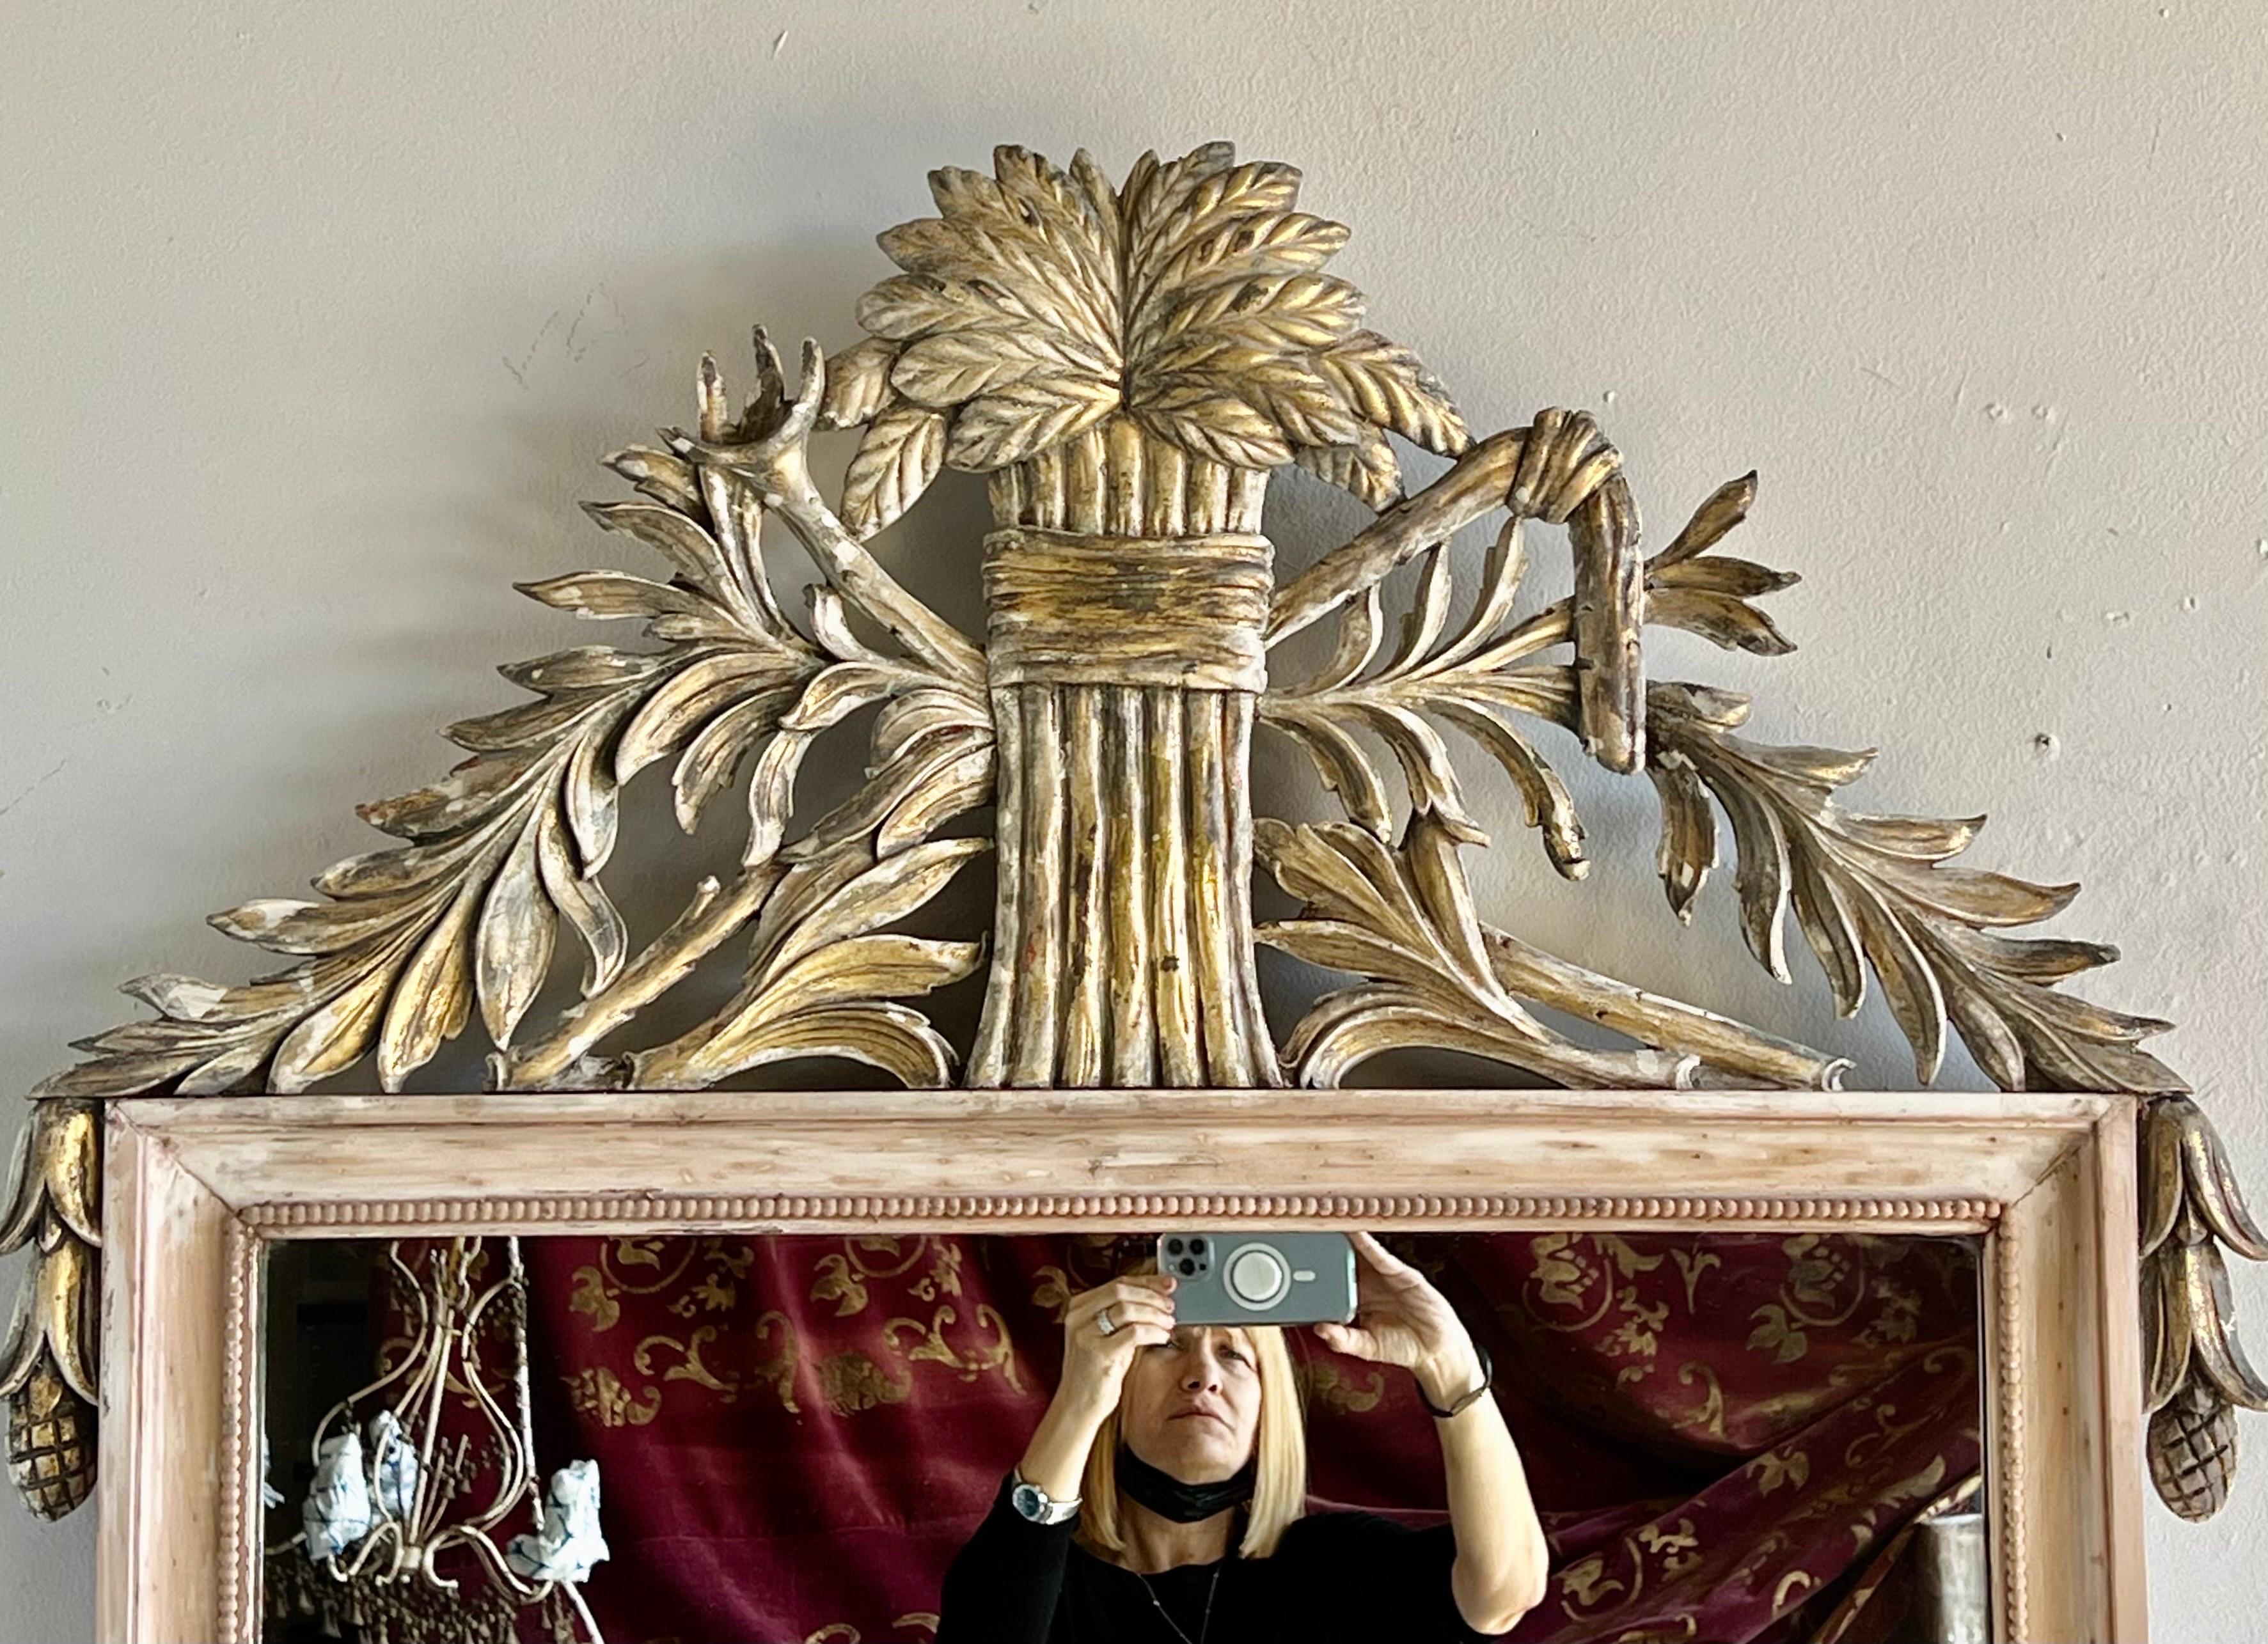 Italian carved wood mirror with gold leaf details. The top of the mirror is adorned with bunches of wheat. There is also leaves flanking the wheat. The finish is beautifully distressed with accents of gold leaf throughout.